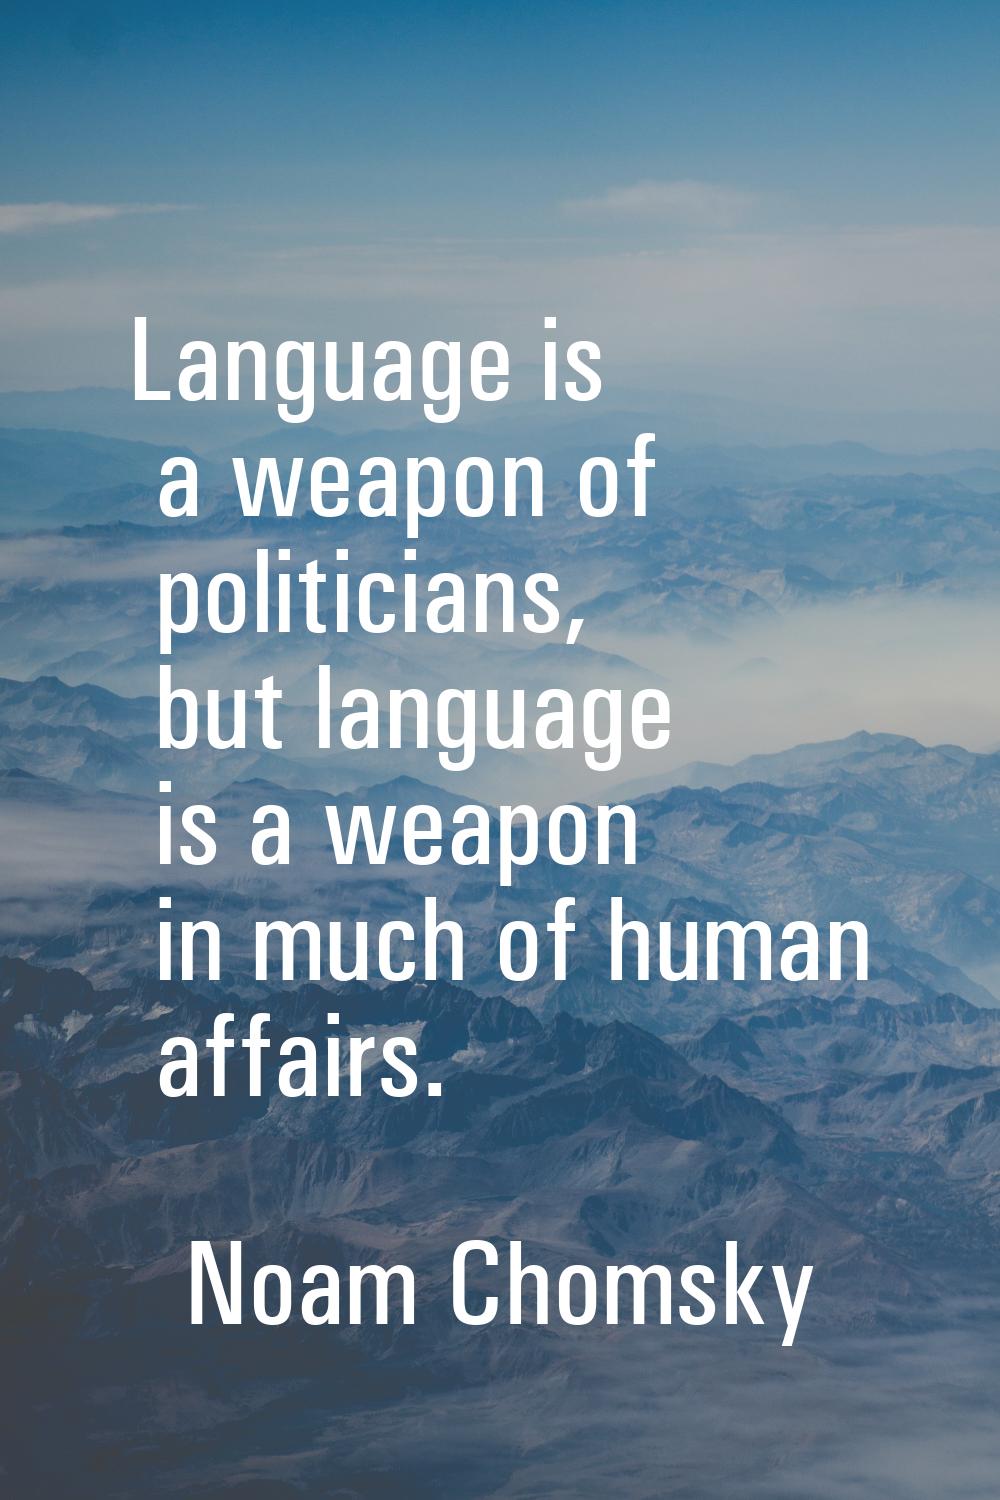 Language is a weapon of politicians, but language is a weapon in much of human affairs.